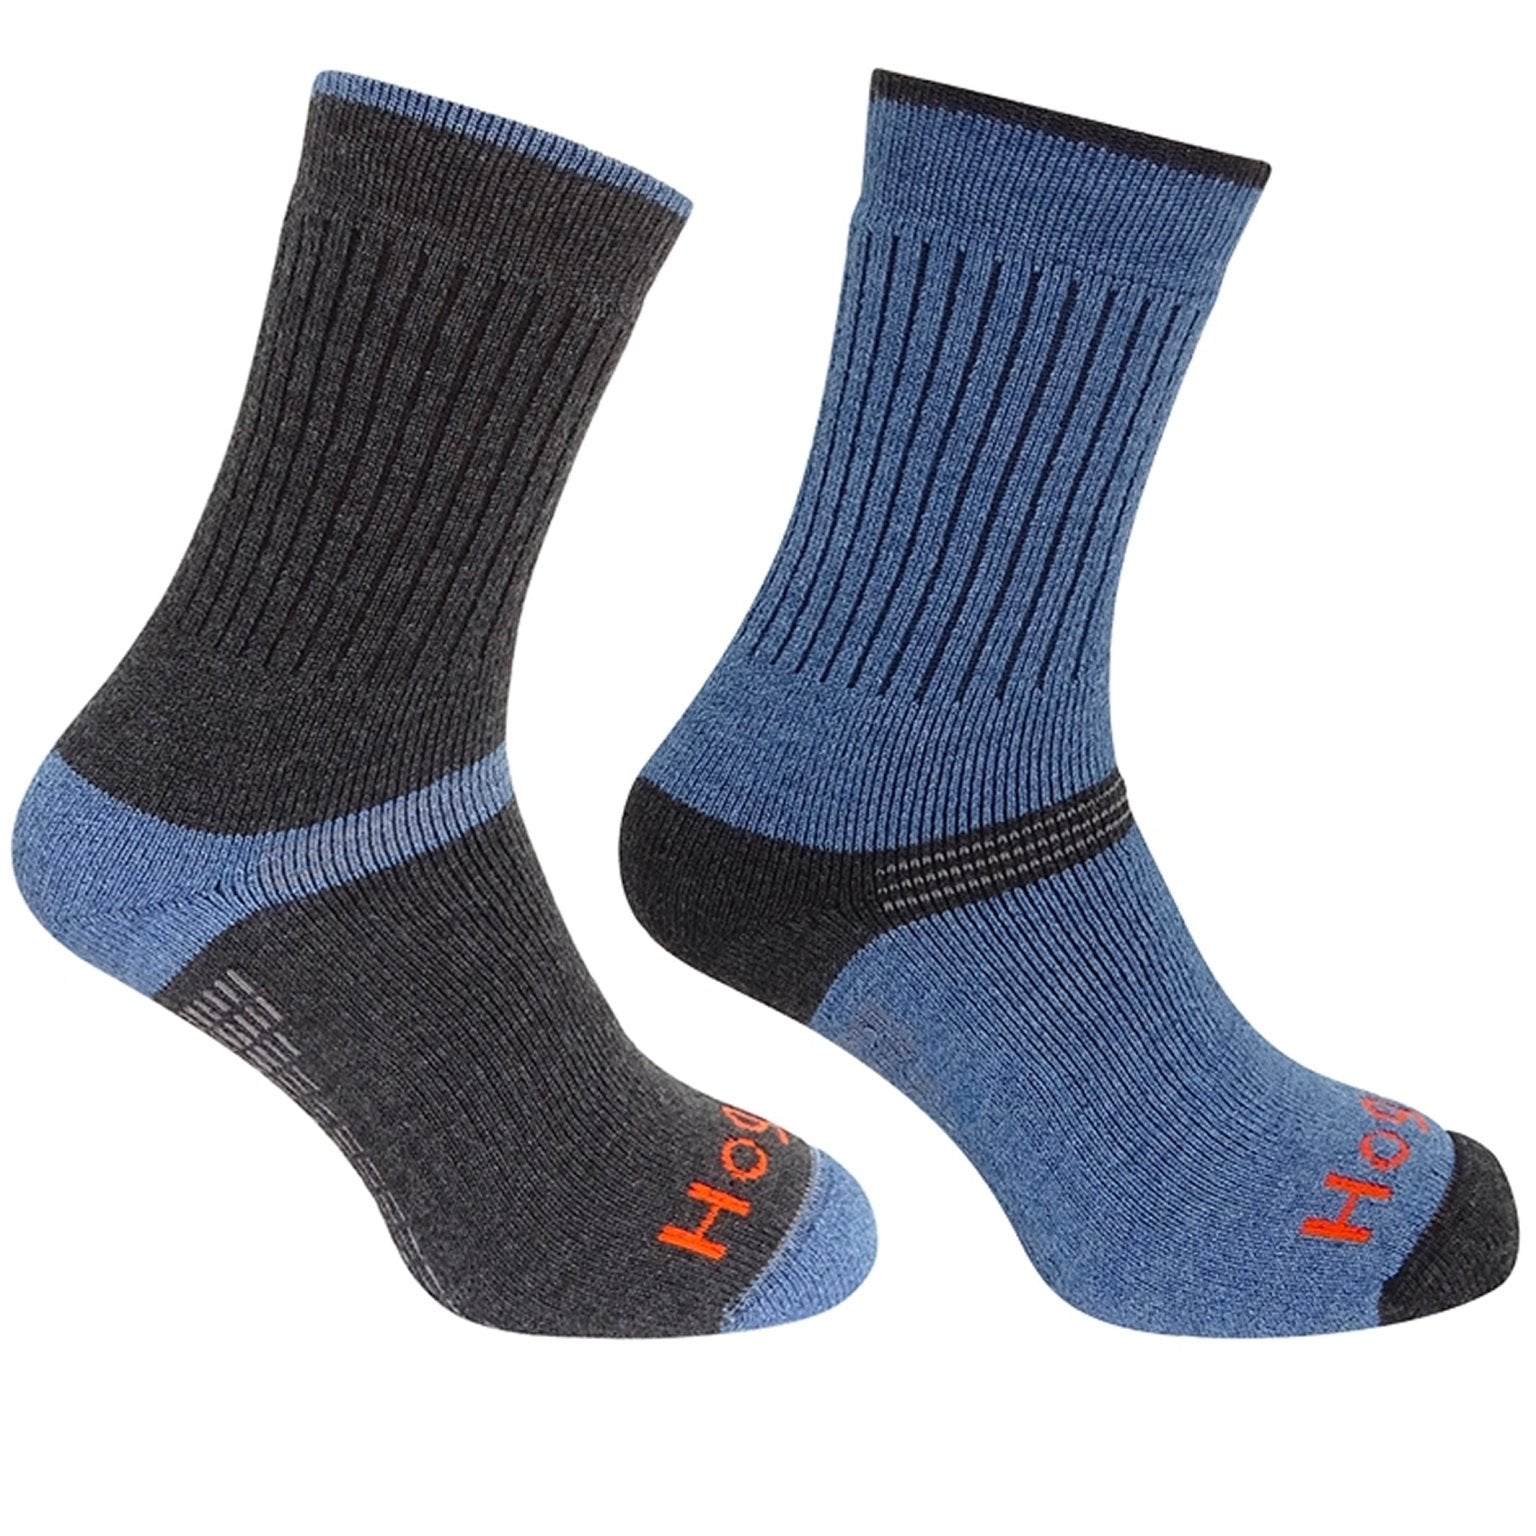 4elementsclothingHoggs of FifeHoggs of Fife - 1905 Mens Socks in Charcoal/Denim (Twin Pack) - Tech ActiveSocks1905/CD/1